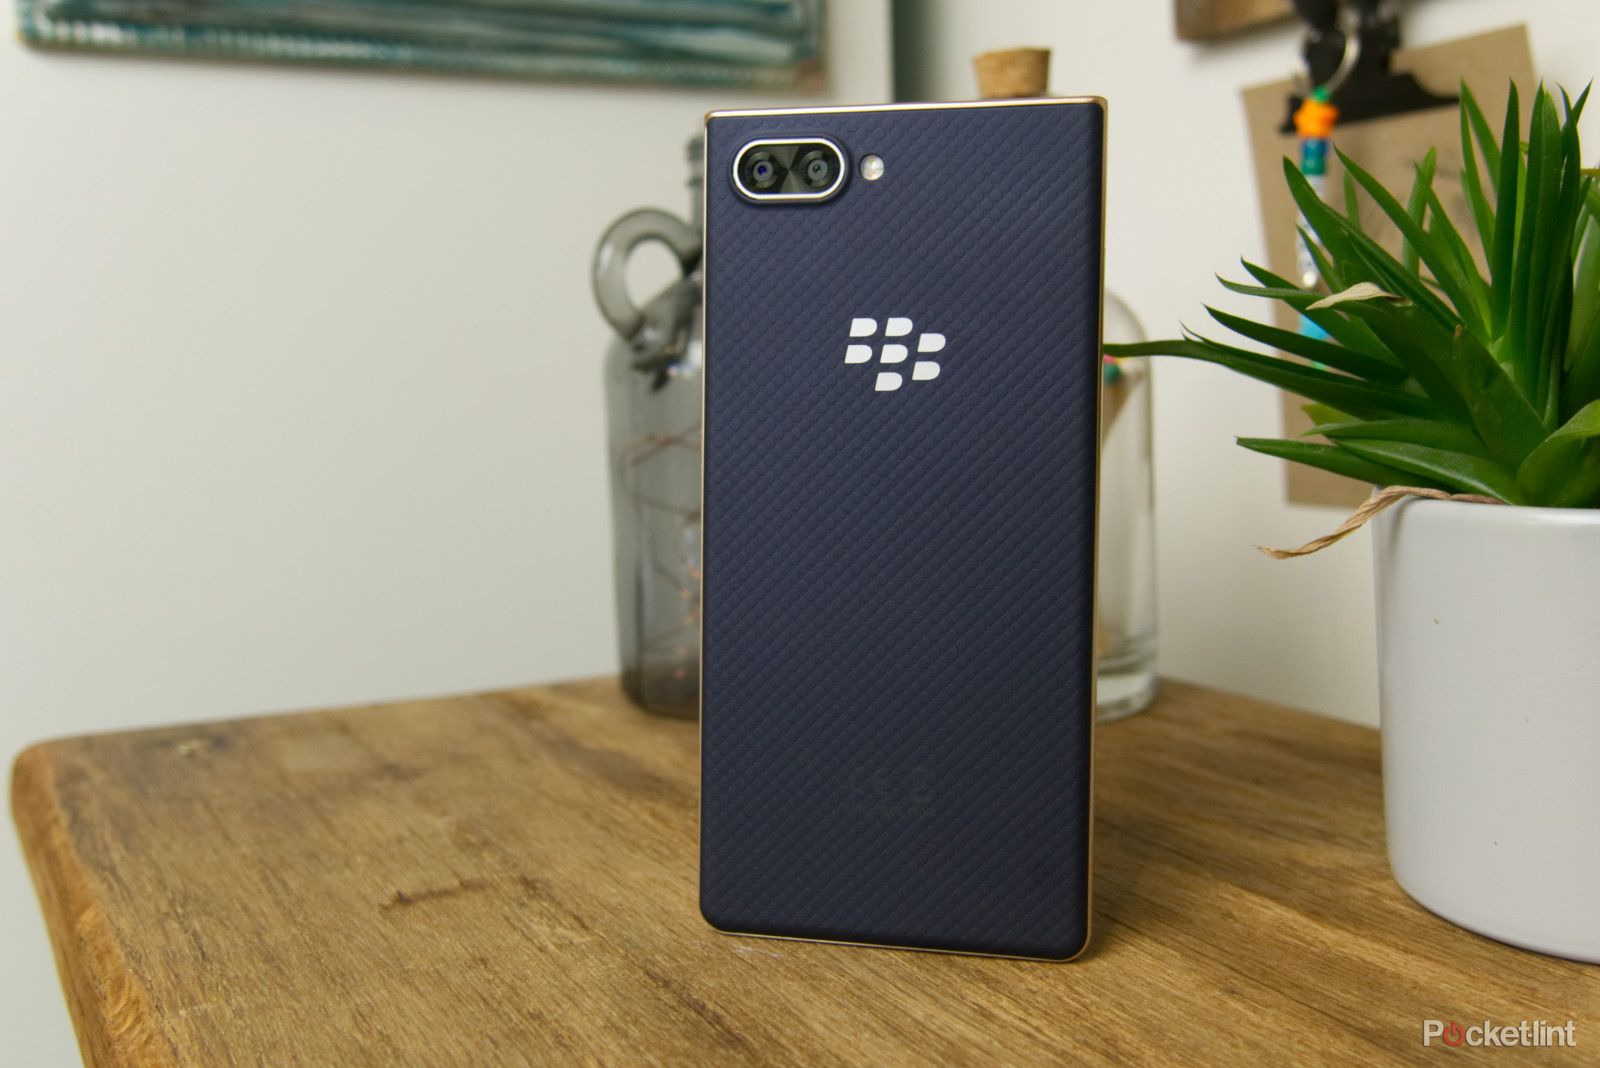 TCL No BlackBerry 5G phone planned image 1